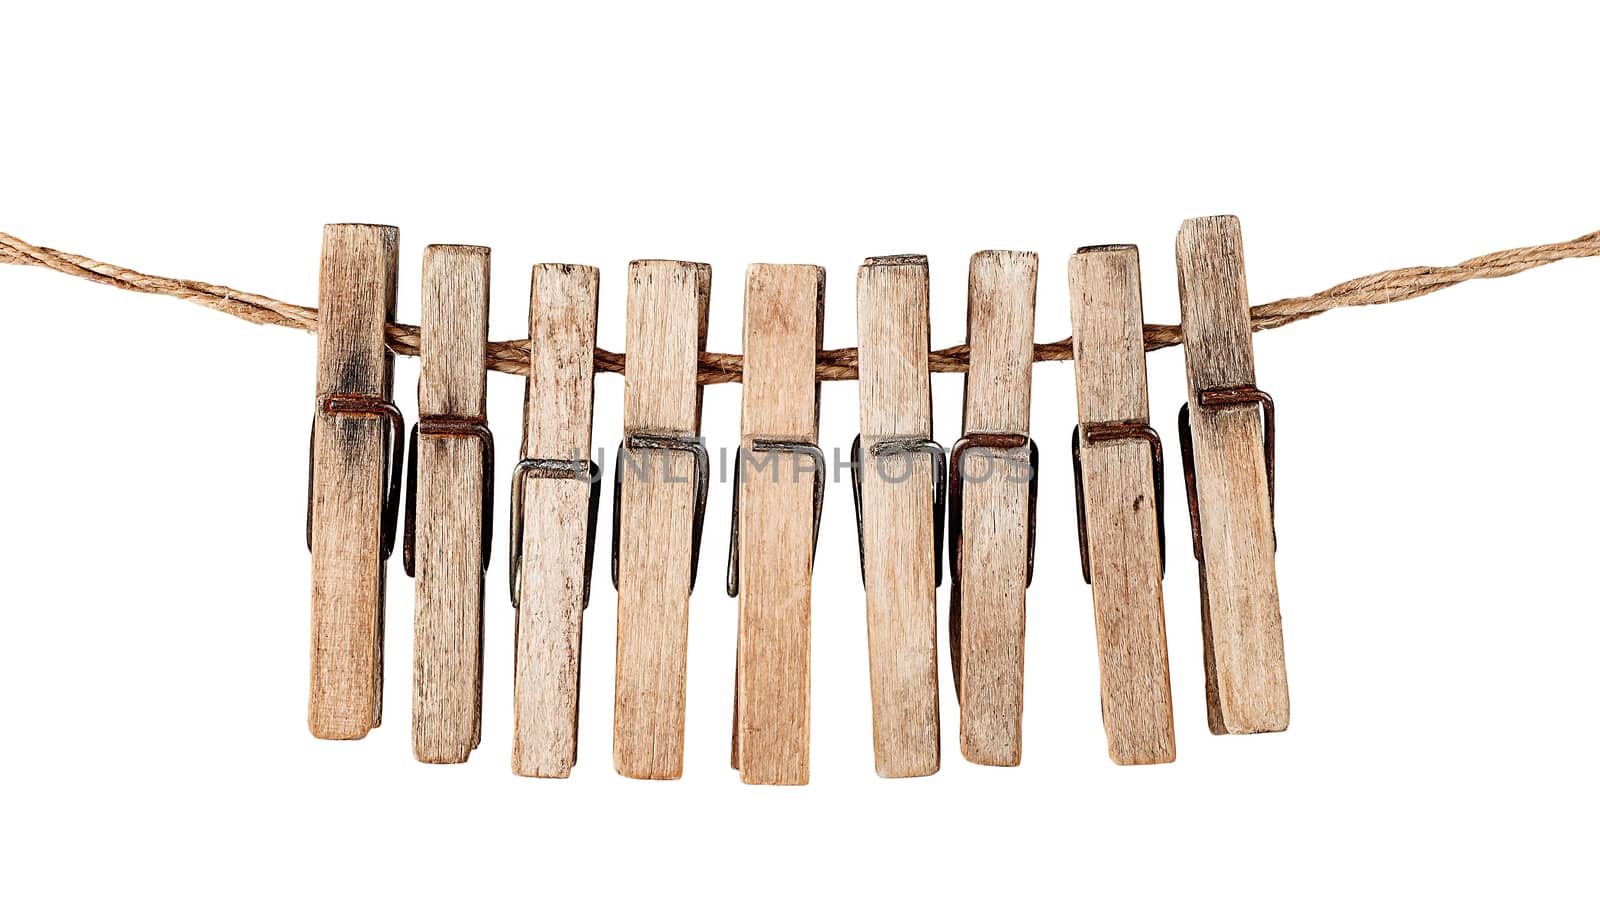 Many old wooden clothespins on a rope isolated on white background